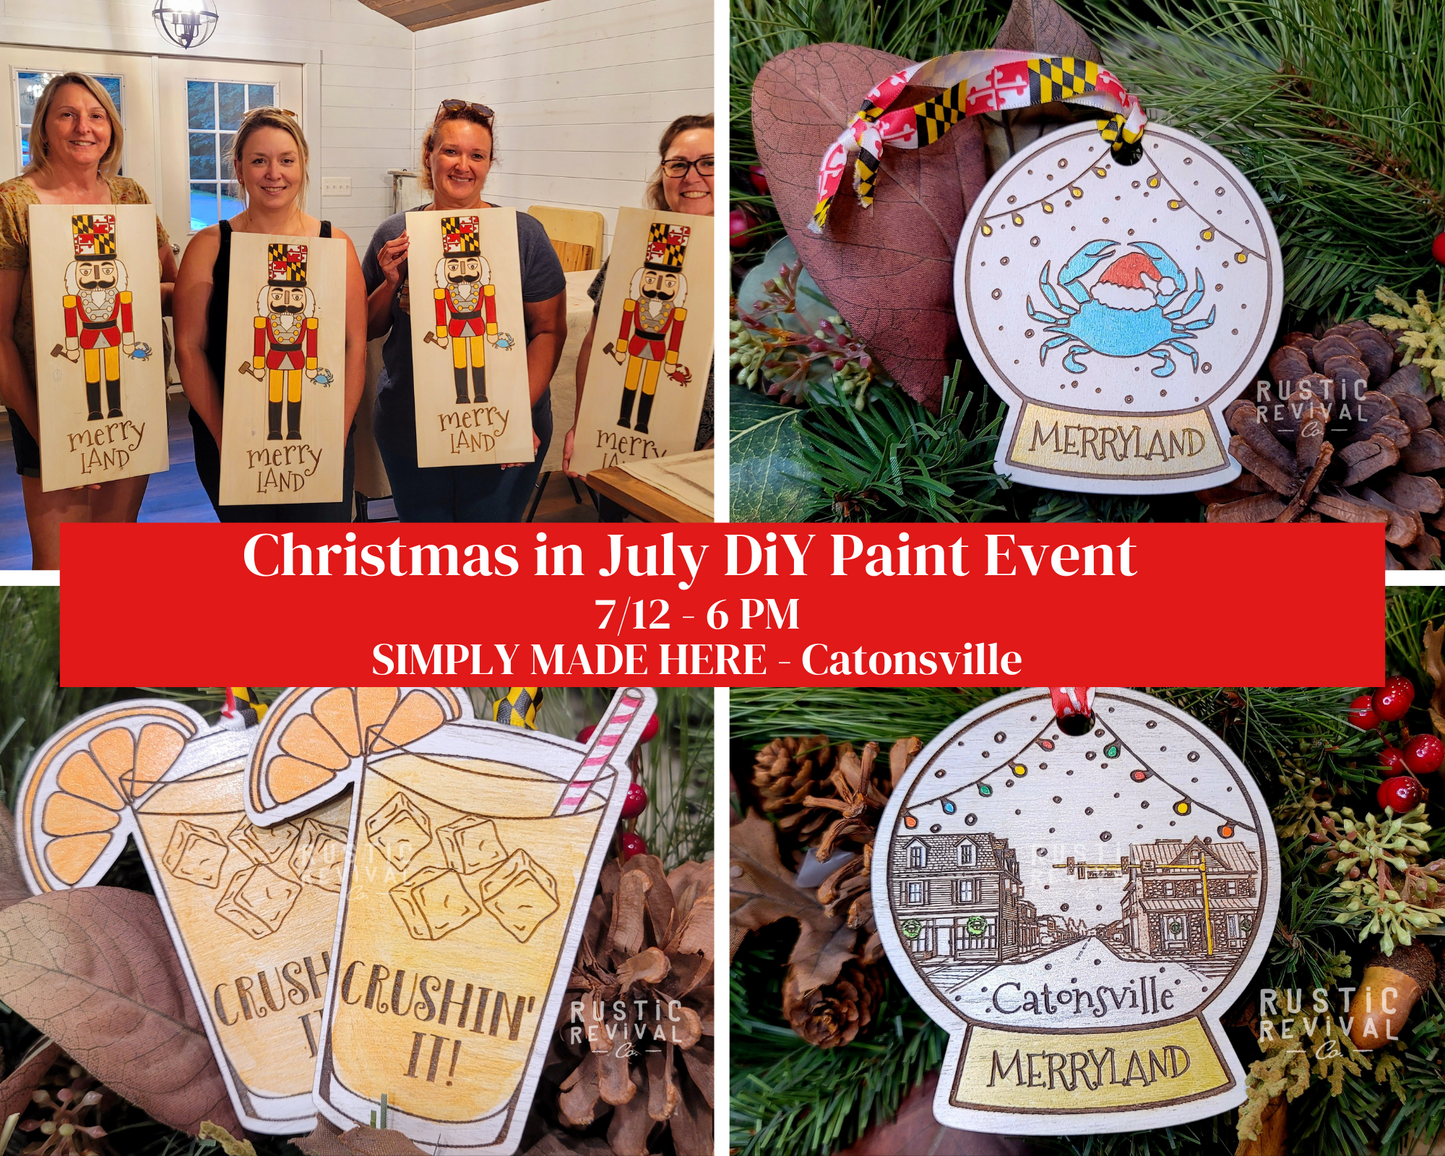 7/12 CHRISTMAS IN JULY EVENT - SIMPLY MADE HERE STUDIO - 21228